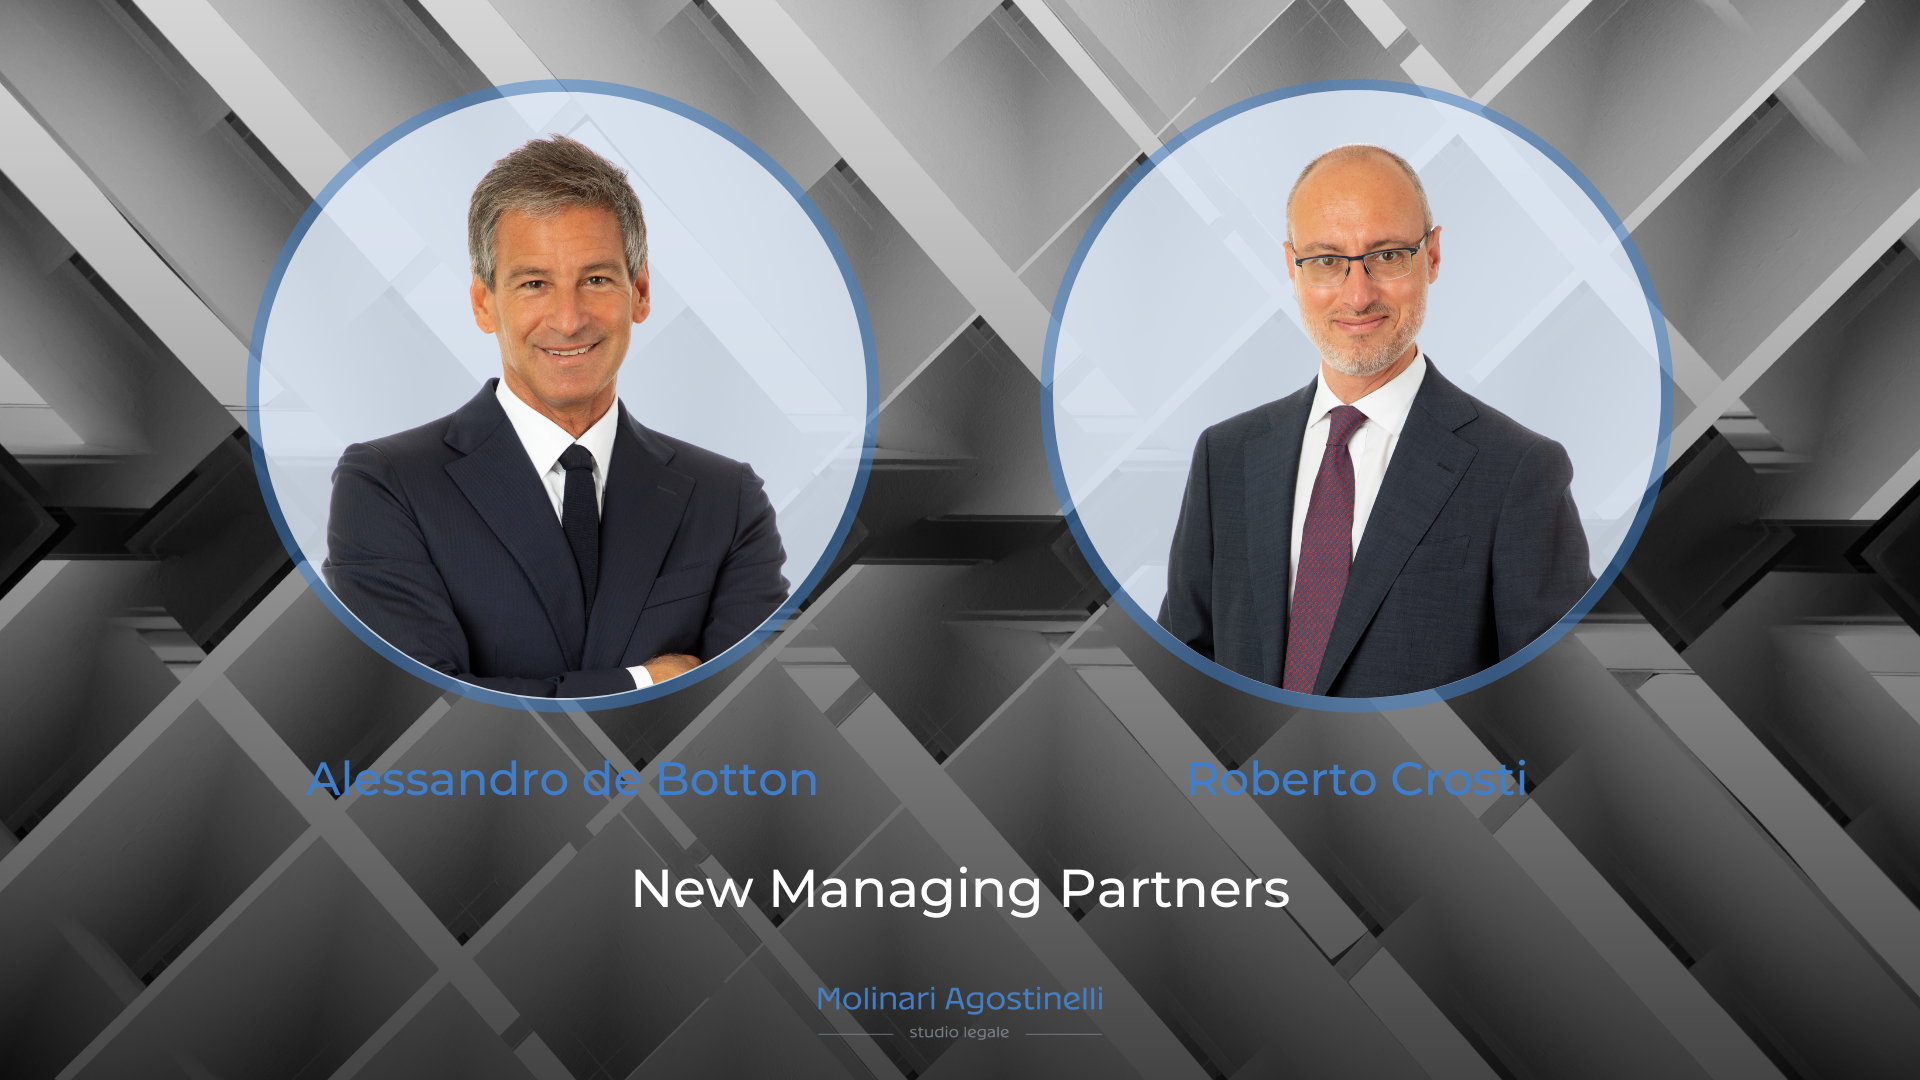 Alessandro de Botton and Roberto Crosti appointed managing partners